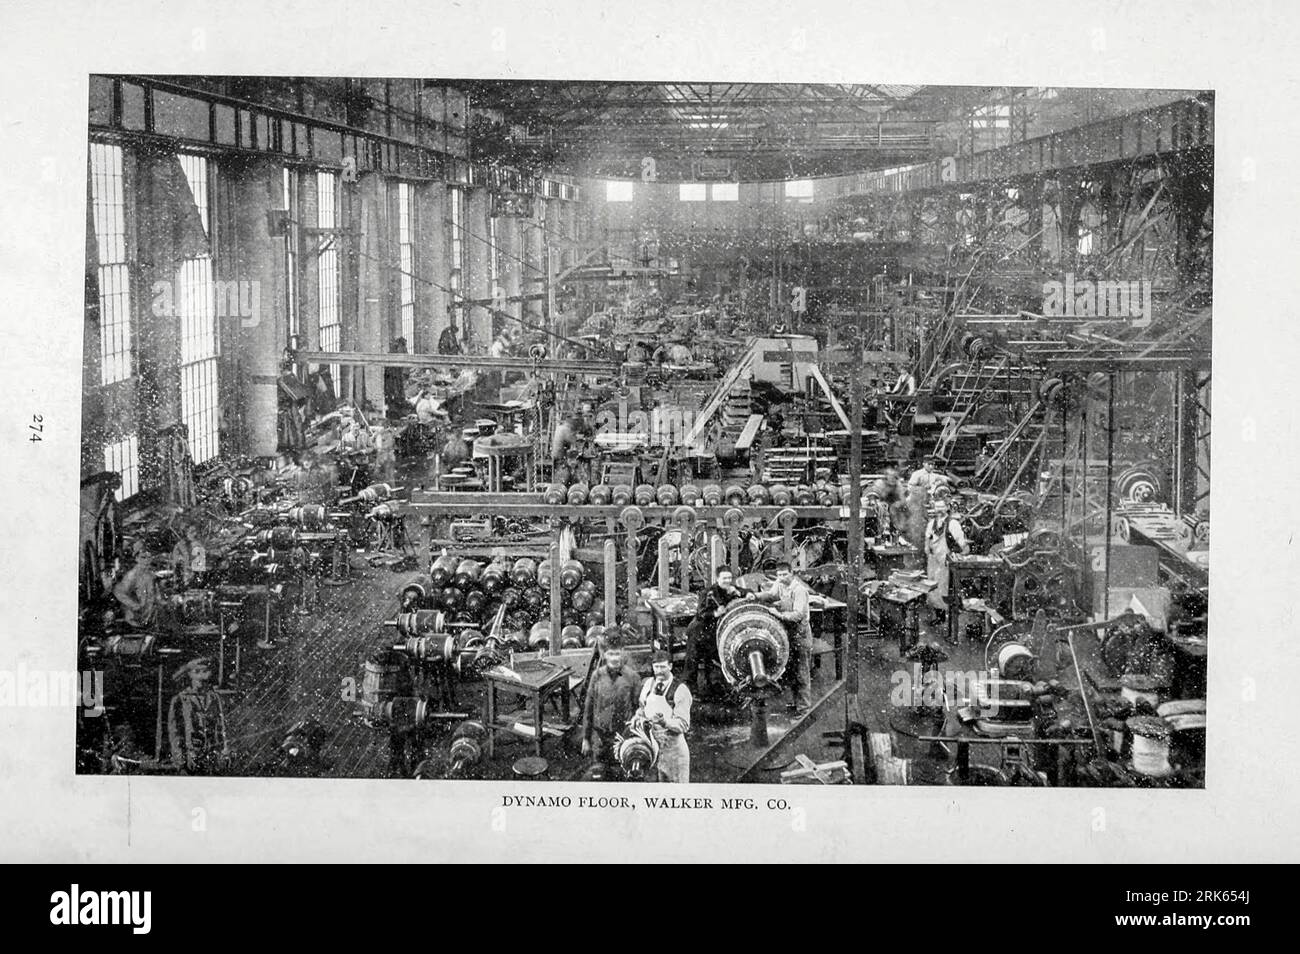 Dynamo Floor Wlaker Mfg. Co. Cleveland, Ohio from the Article MODERN MACHINE-SHOP ECONOMICS PRIME REQUISITES OF SHOP CONSTRUCTION By Horace L. Arnold from The Engineering Magazine DEVOTED TO INDUSTRIAL PROGRESS Volume XI October 1896 NEW YORK The Engineering Magazine Co Stock Photo